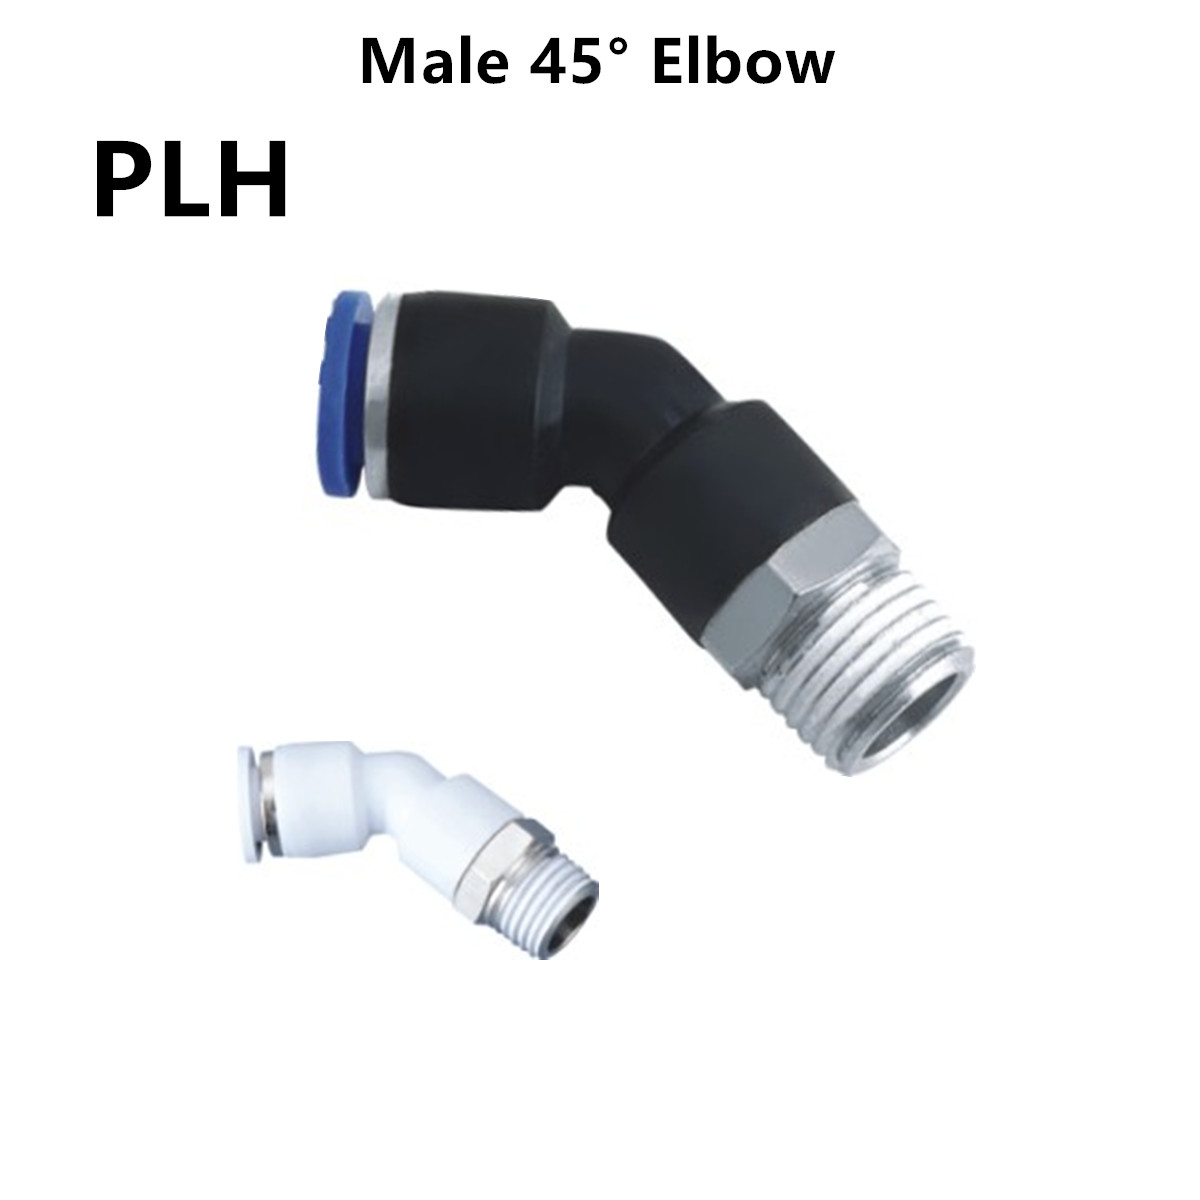 Male 45° Elbow